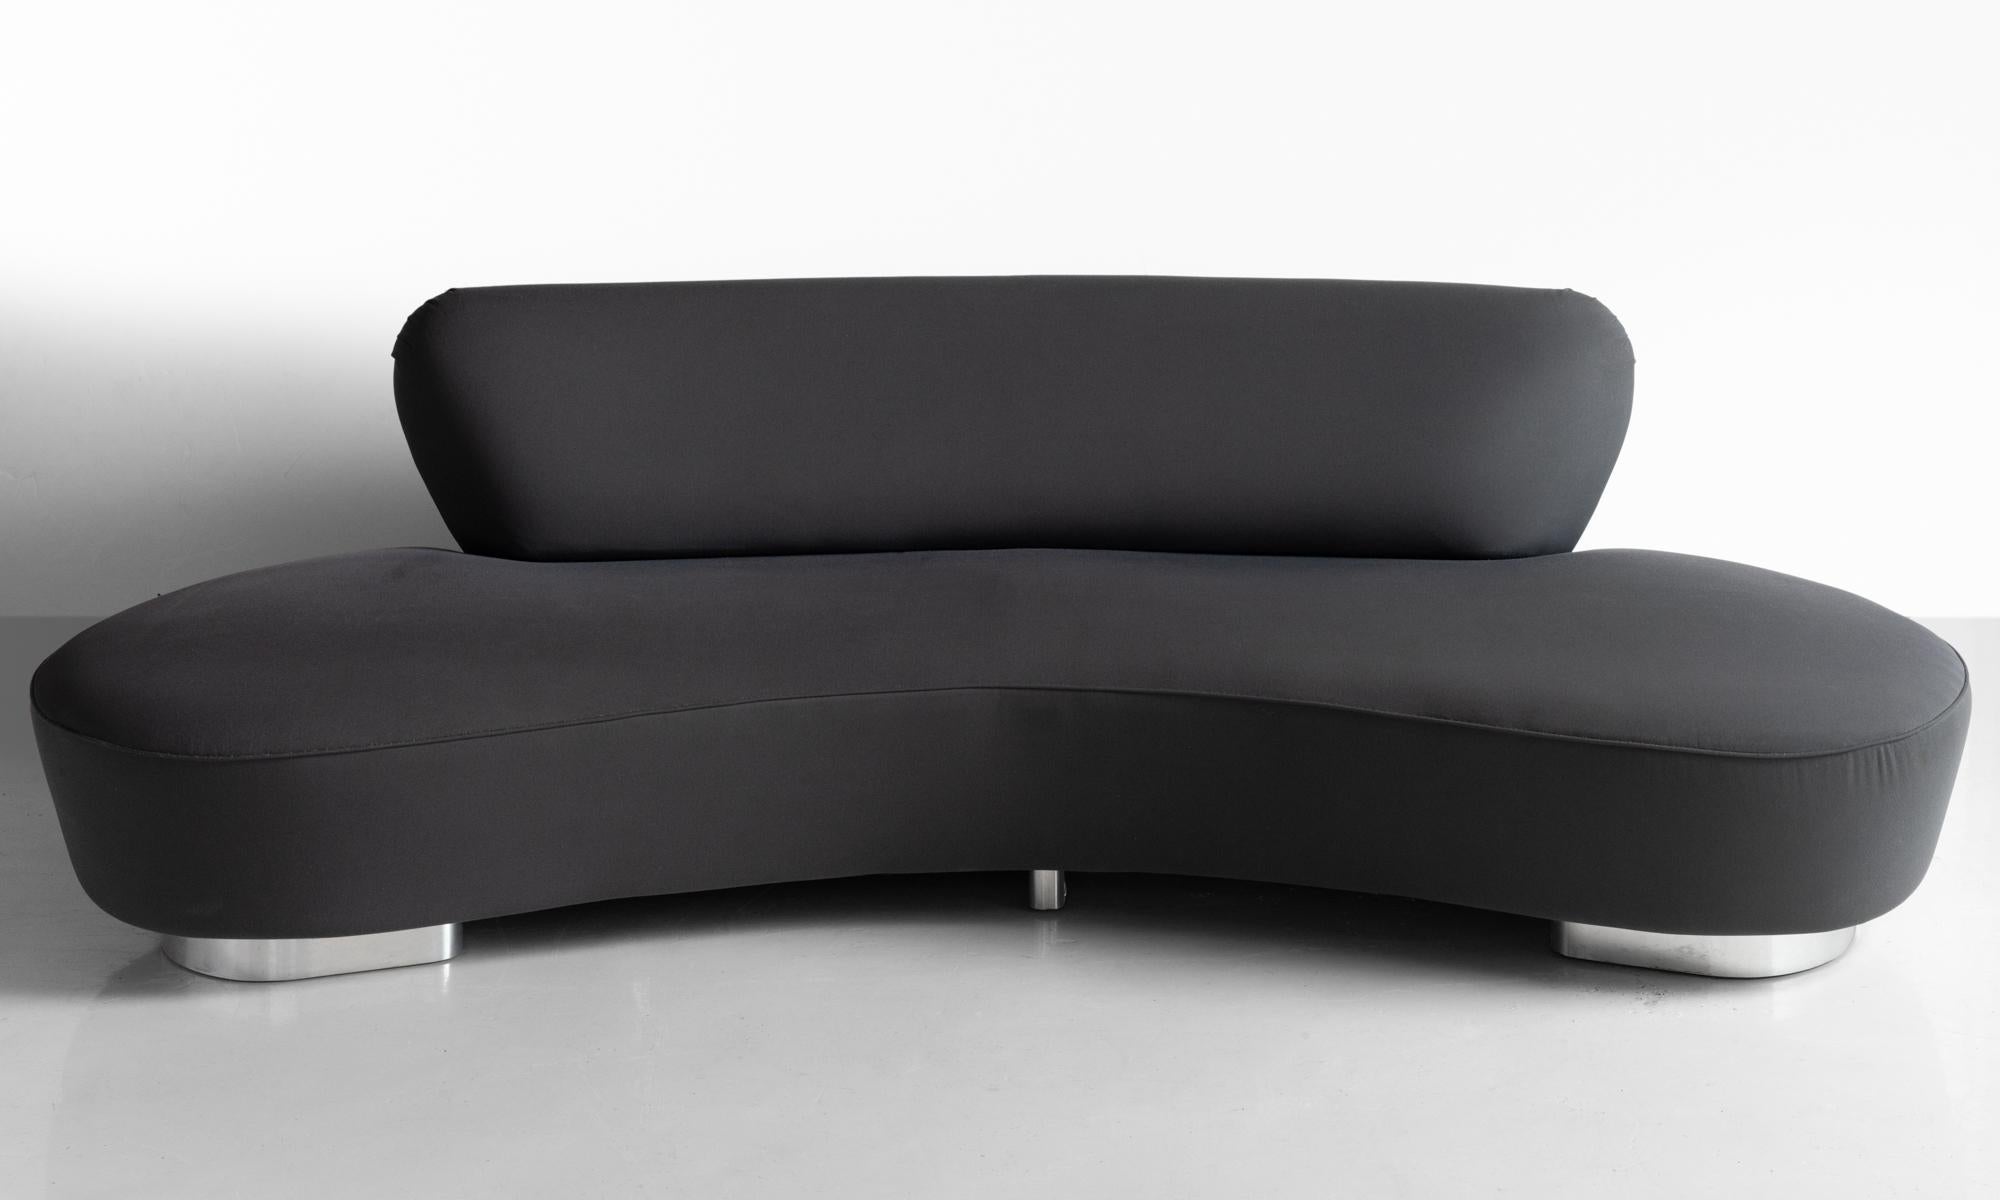 Cloud Sofa by Vladimir Kagan, America, 21st century.

Original upholstery with Chrome Base and makers label.